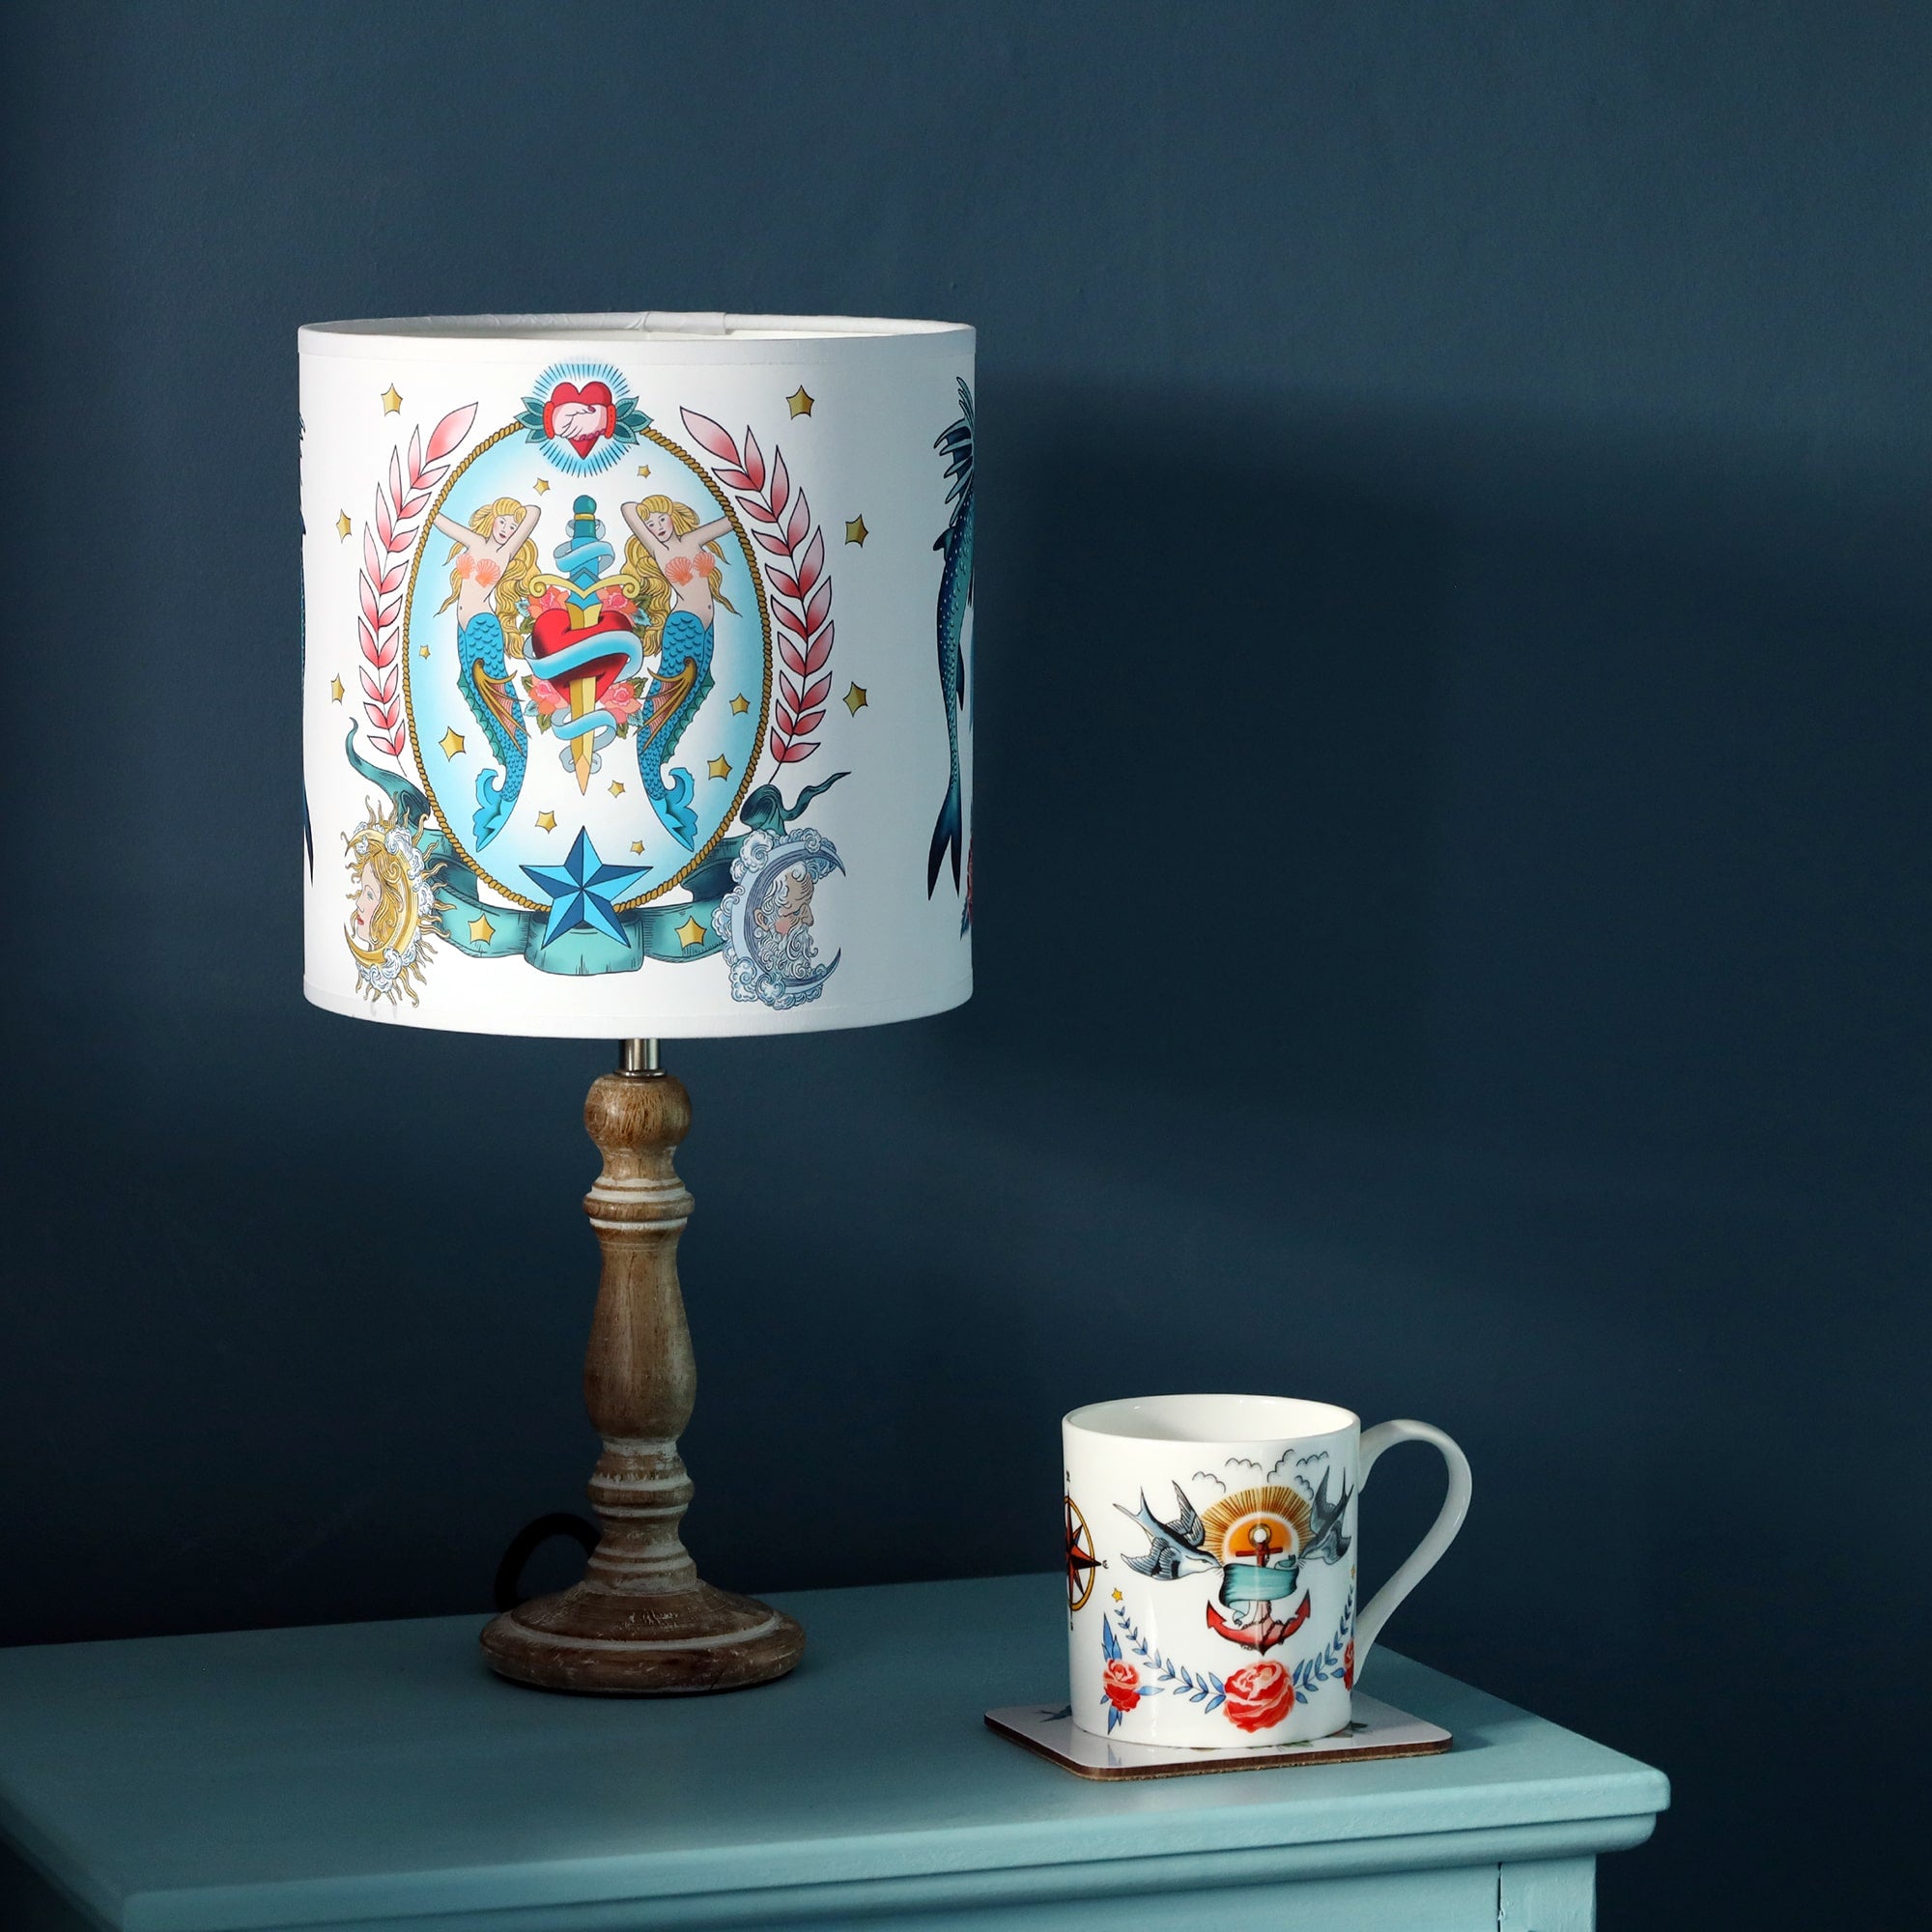 Small pixie whitewashed wooden lamp base with tattoo inspired lampshade with mermaids, heart and dagger design, with a mug with lighthouse and kraken design on the blue cabinet as well. All this is set against a dark denim blue wall.